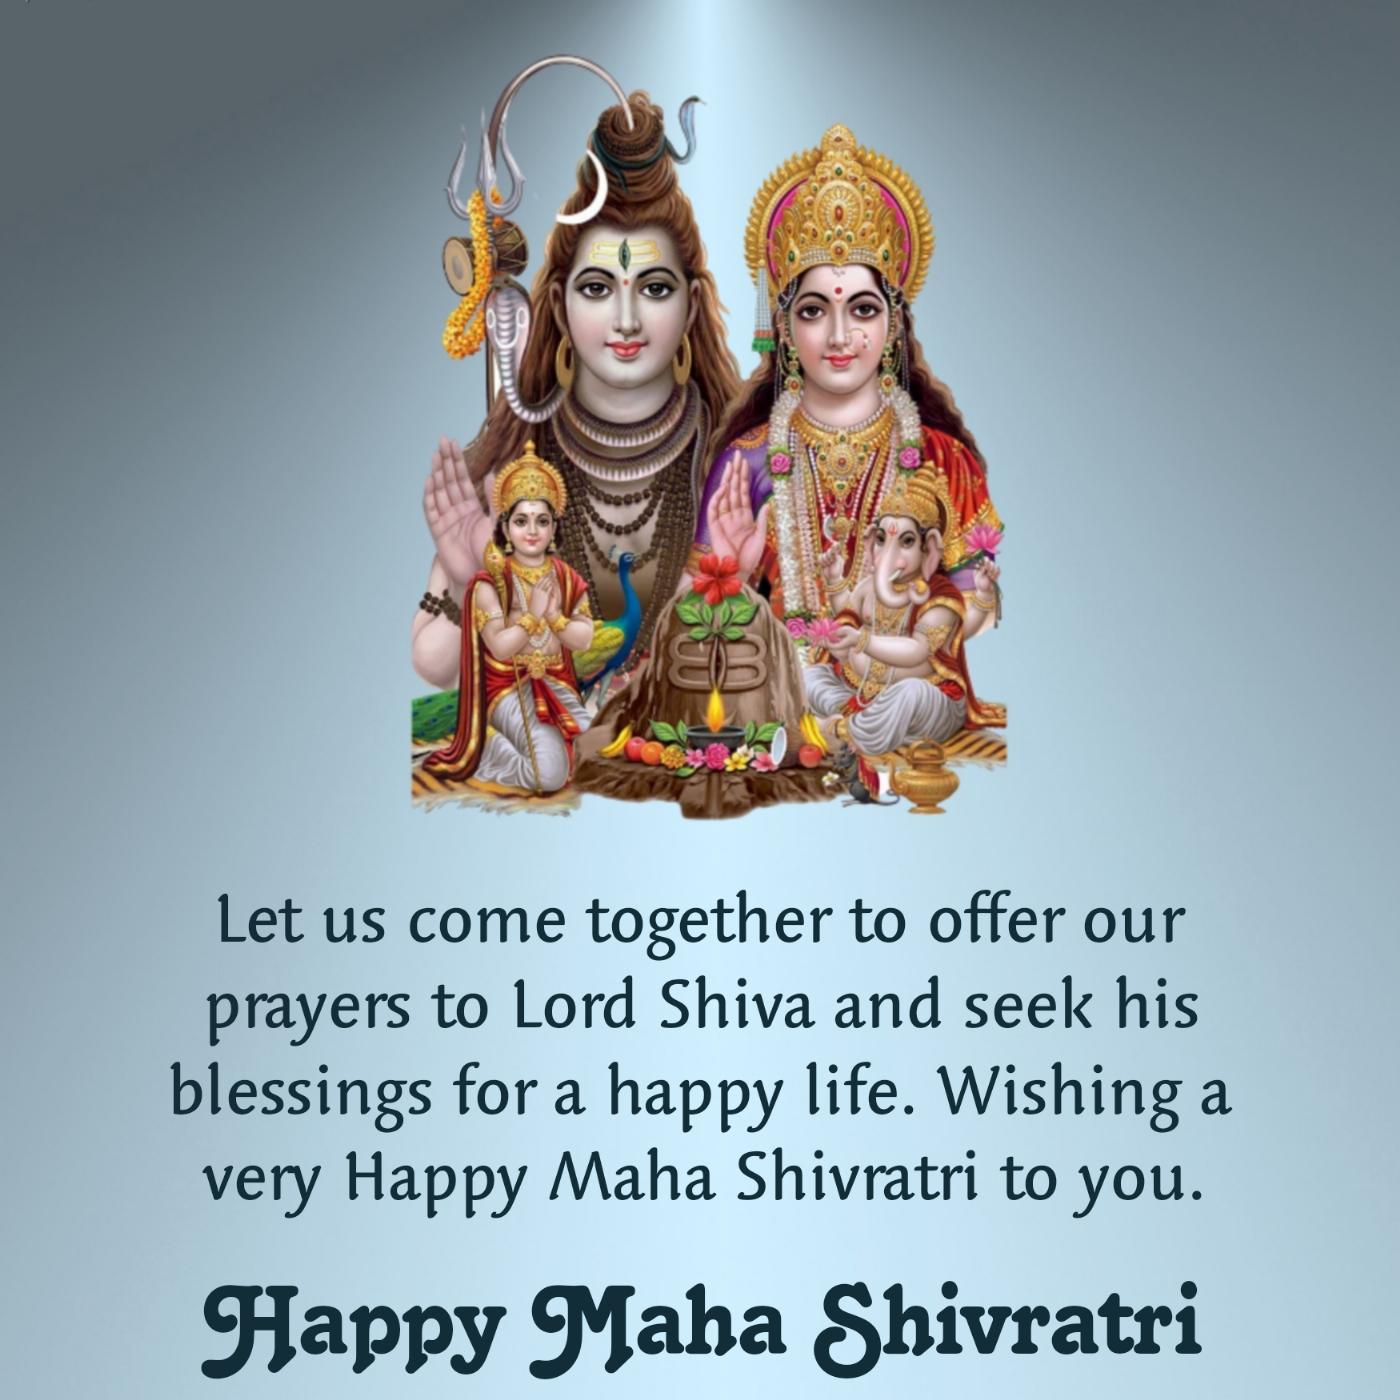 Let us come together to offer our prayers to Lord Shiva